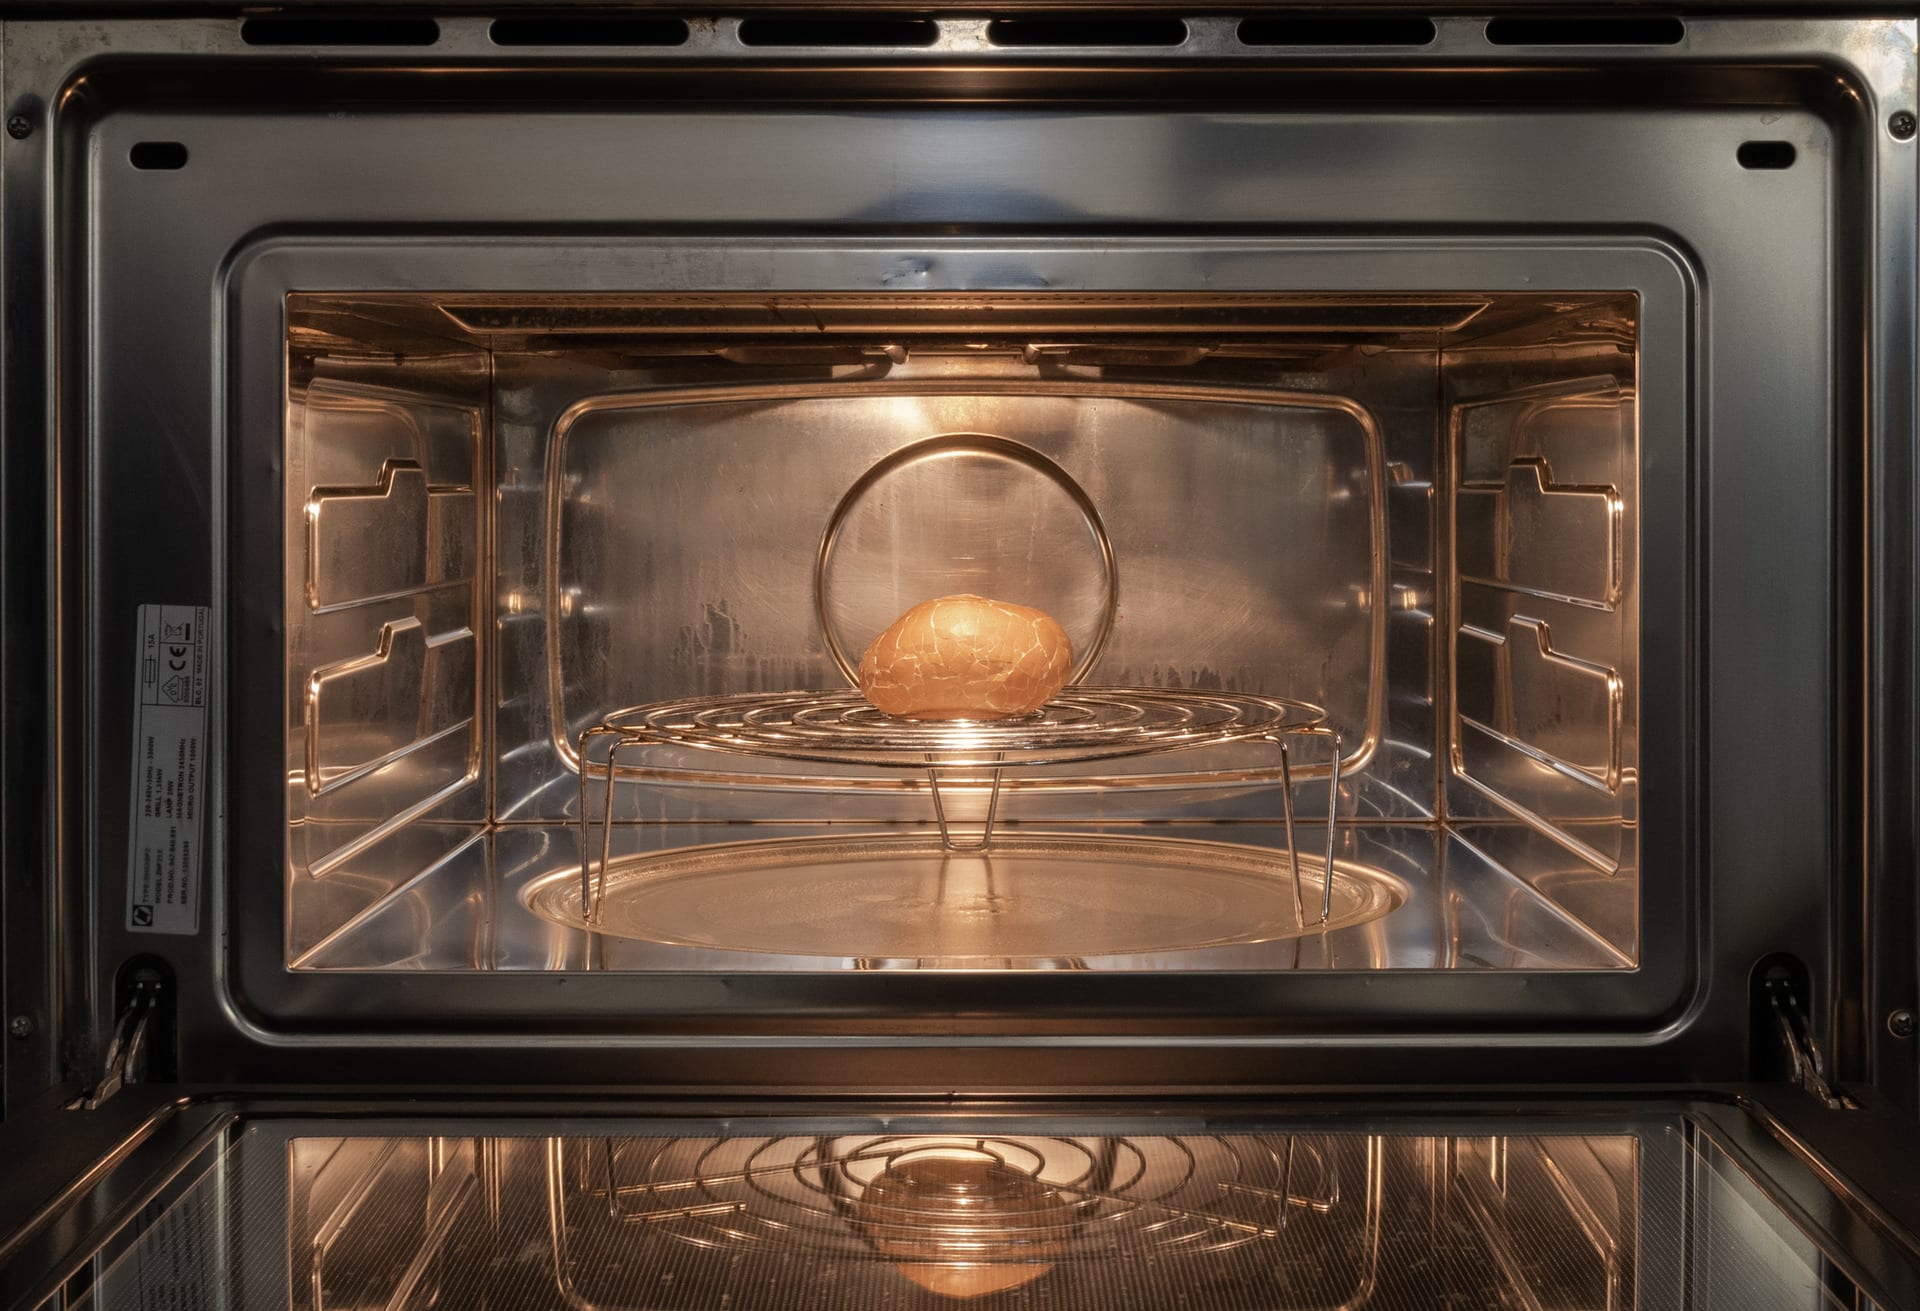 A misshapen egg is placed in the microwave.